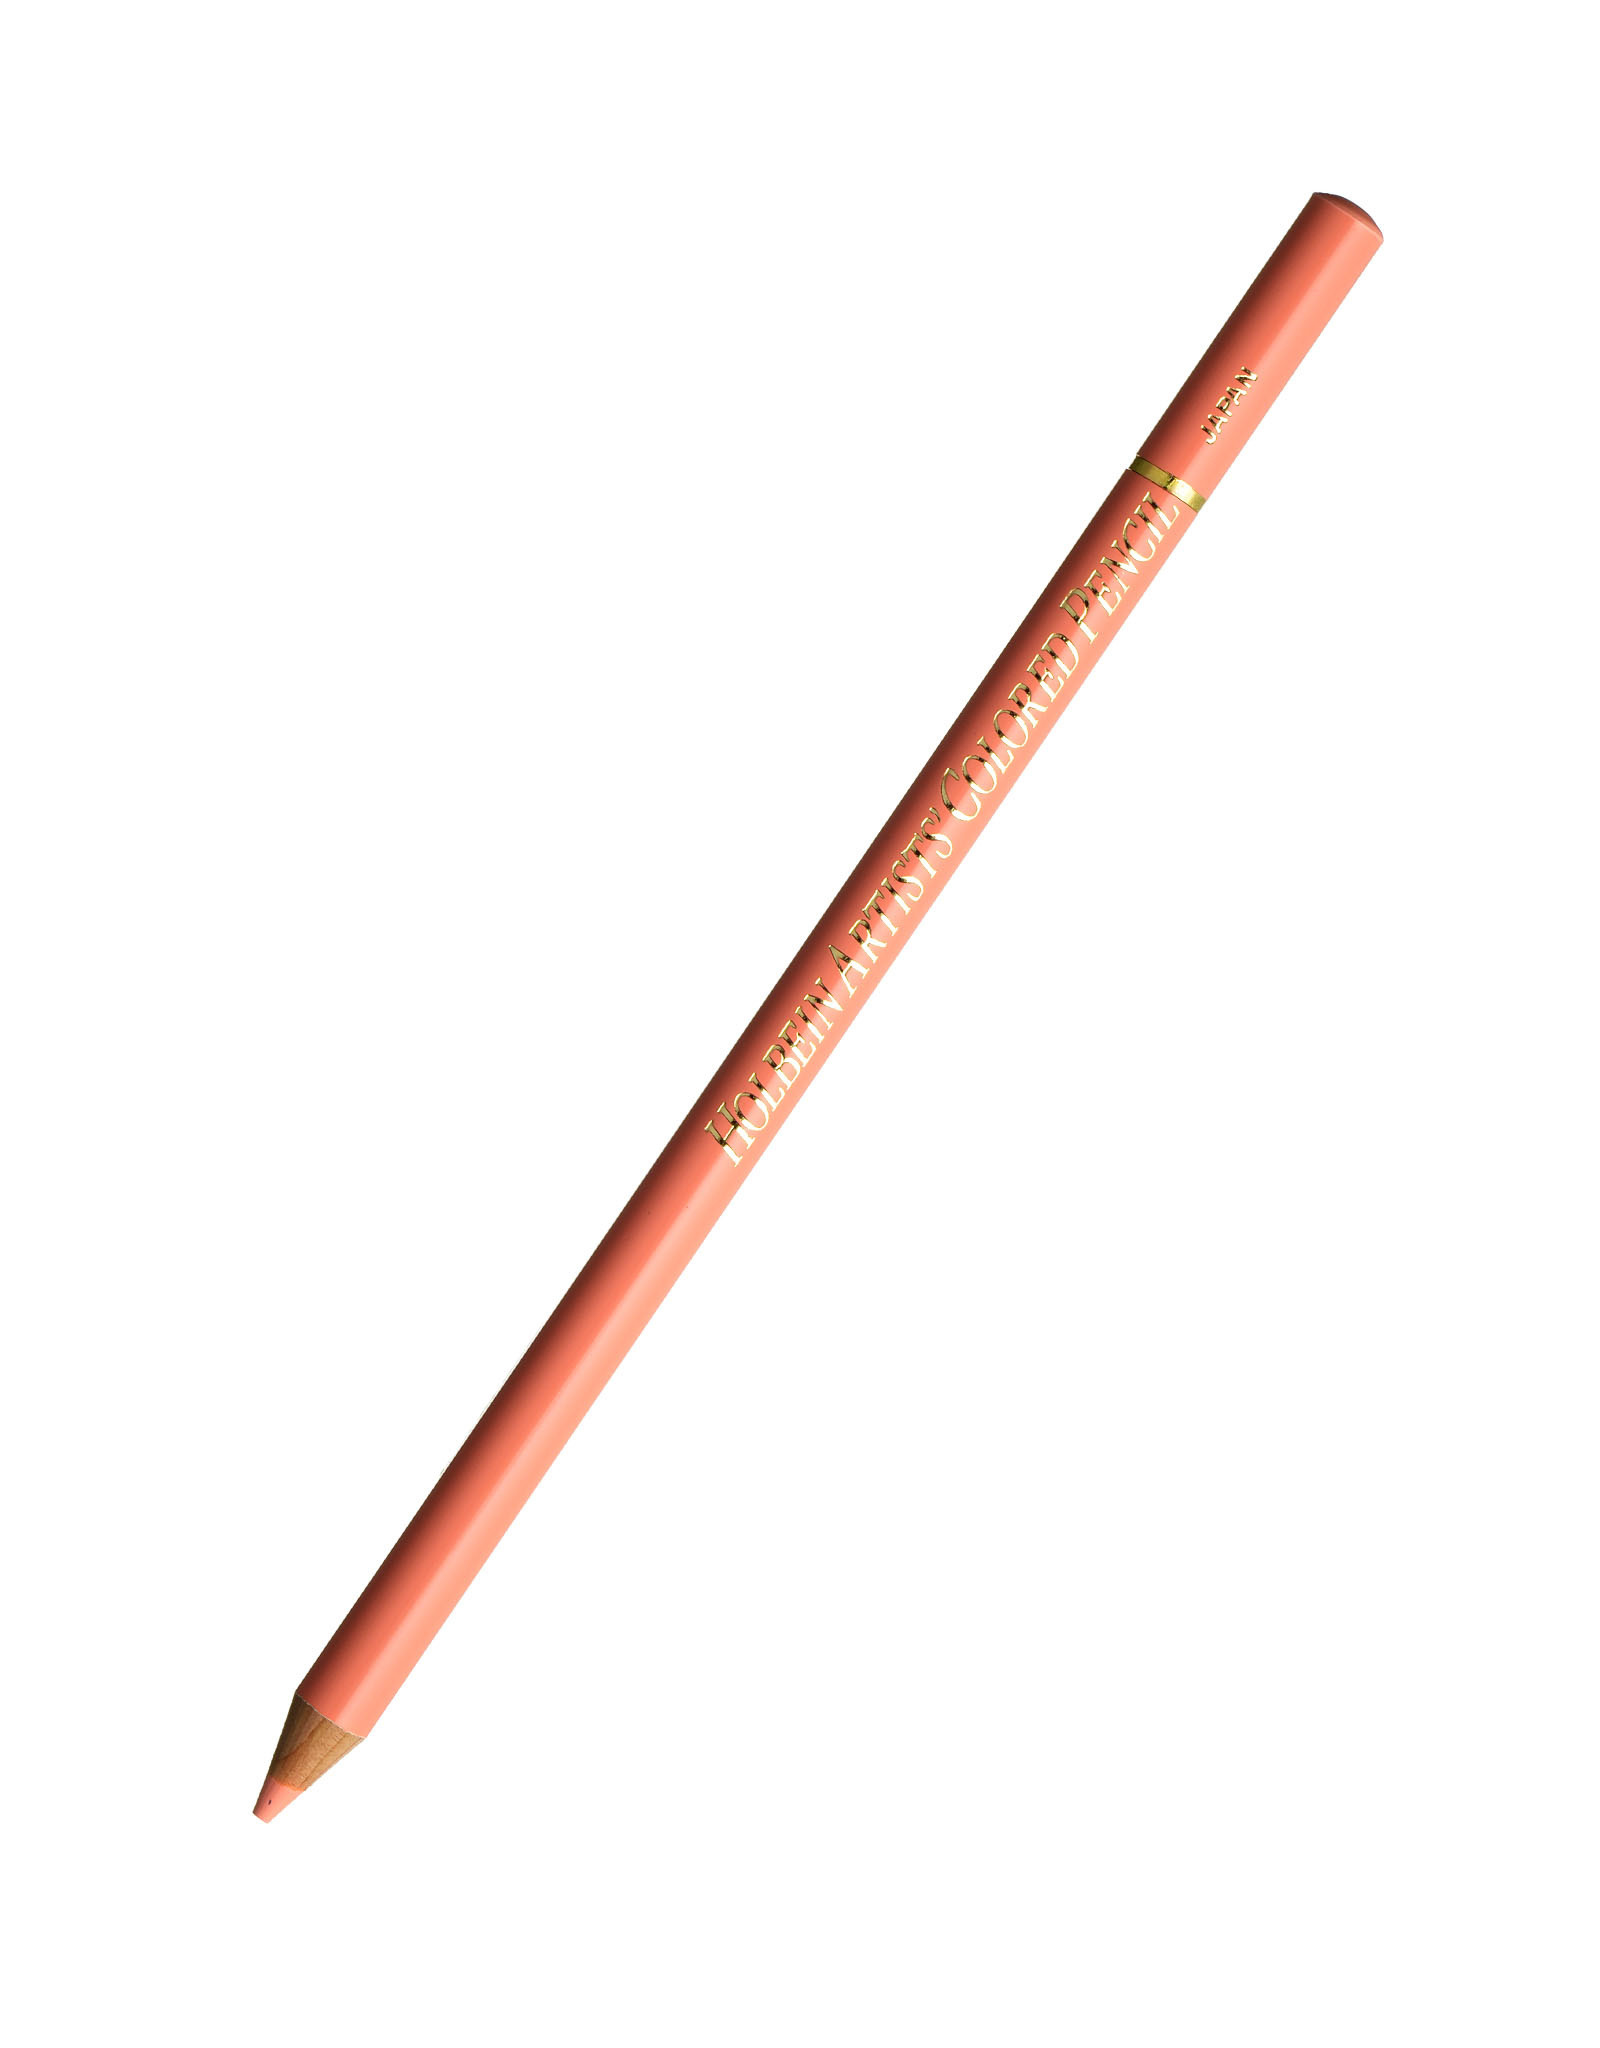 HOLBEIN Holbein Colored Pencil, Coral